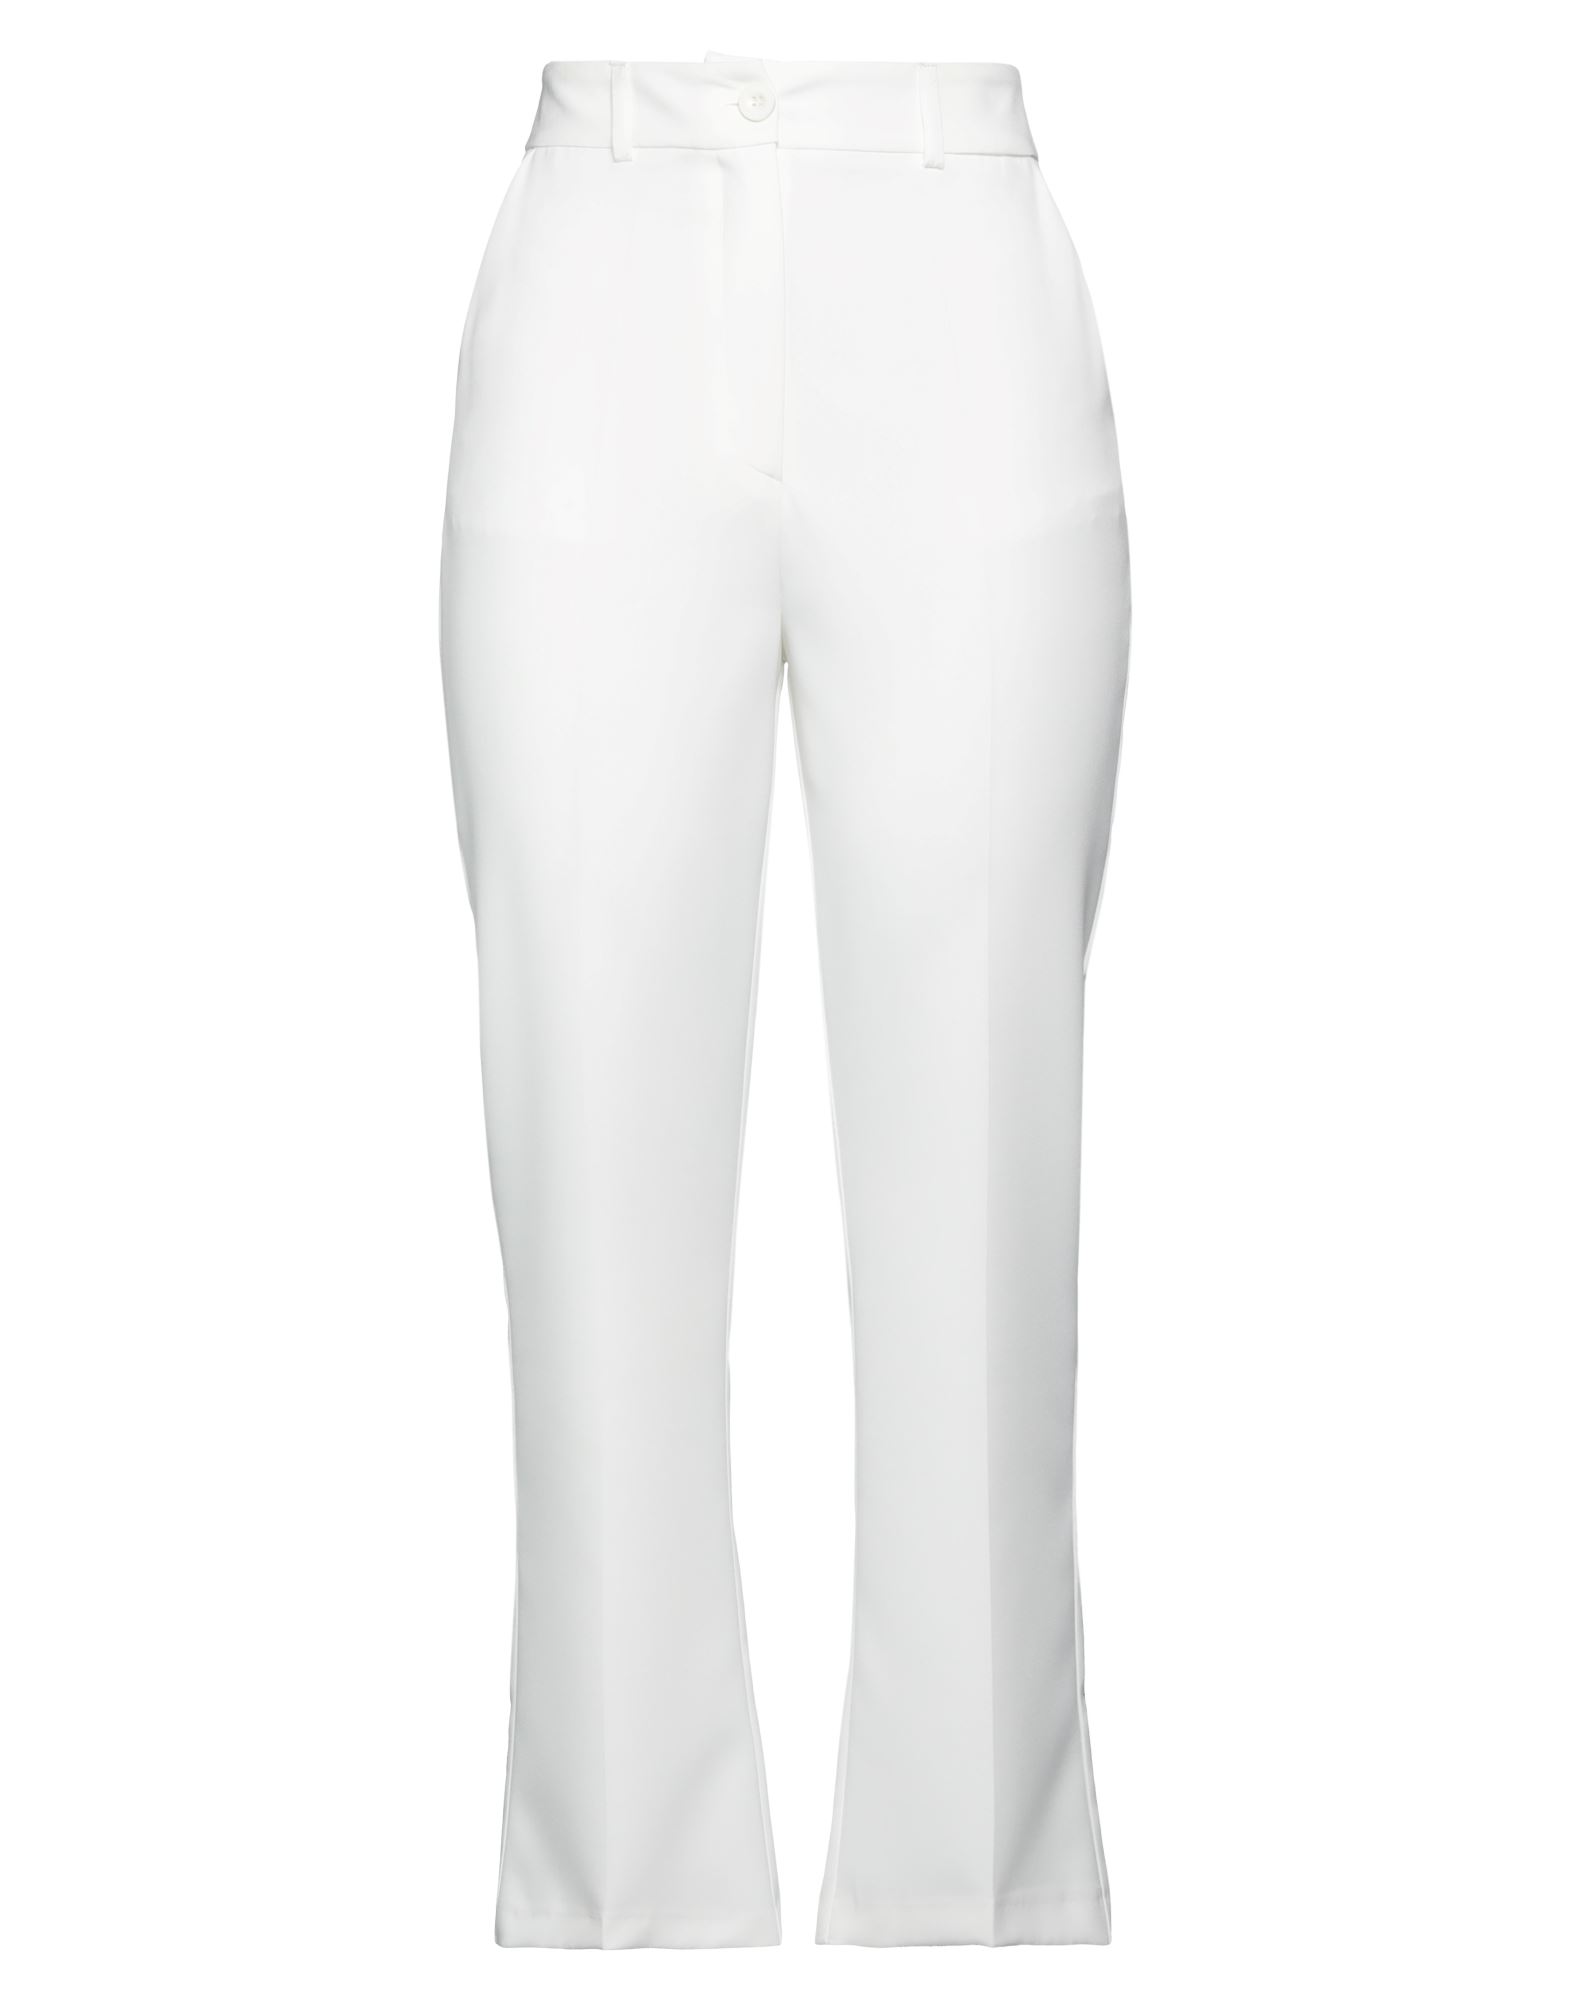 Denny Rose Woman Pants Ivory Size 6 Polyester, Elastane In White